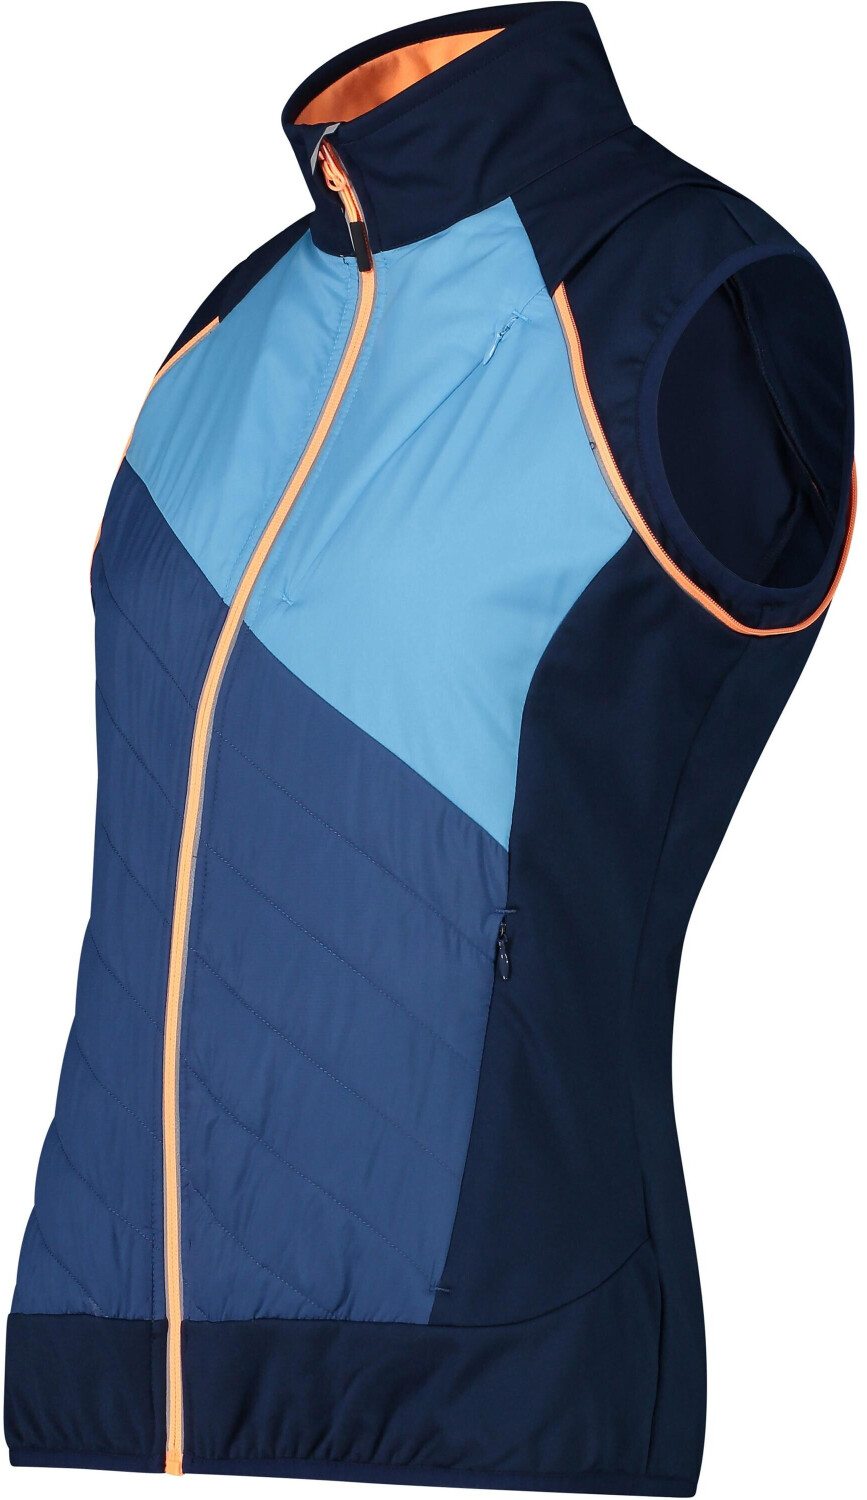 Buy CMP Women's Hybrid Jacket with Removable Sleeves (30A2276) blue/dusty  blue from £52.99 (Today) – Best Deals on